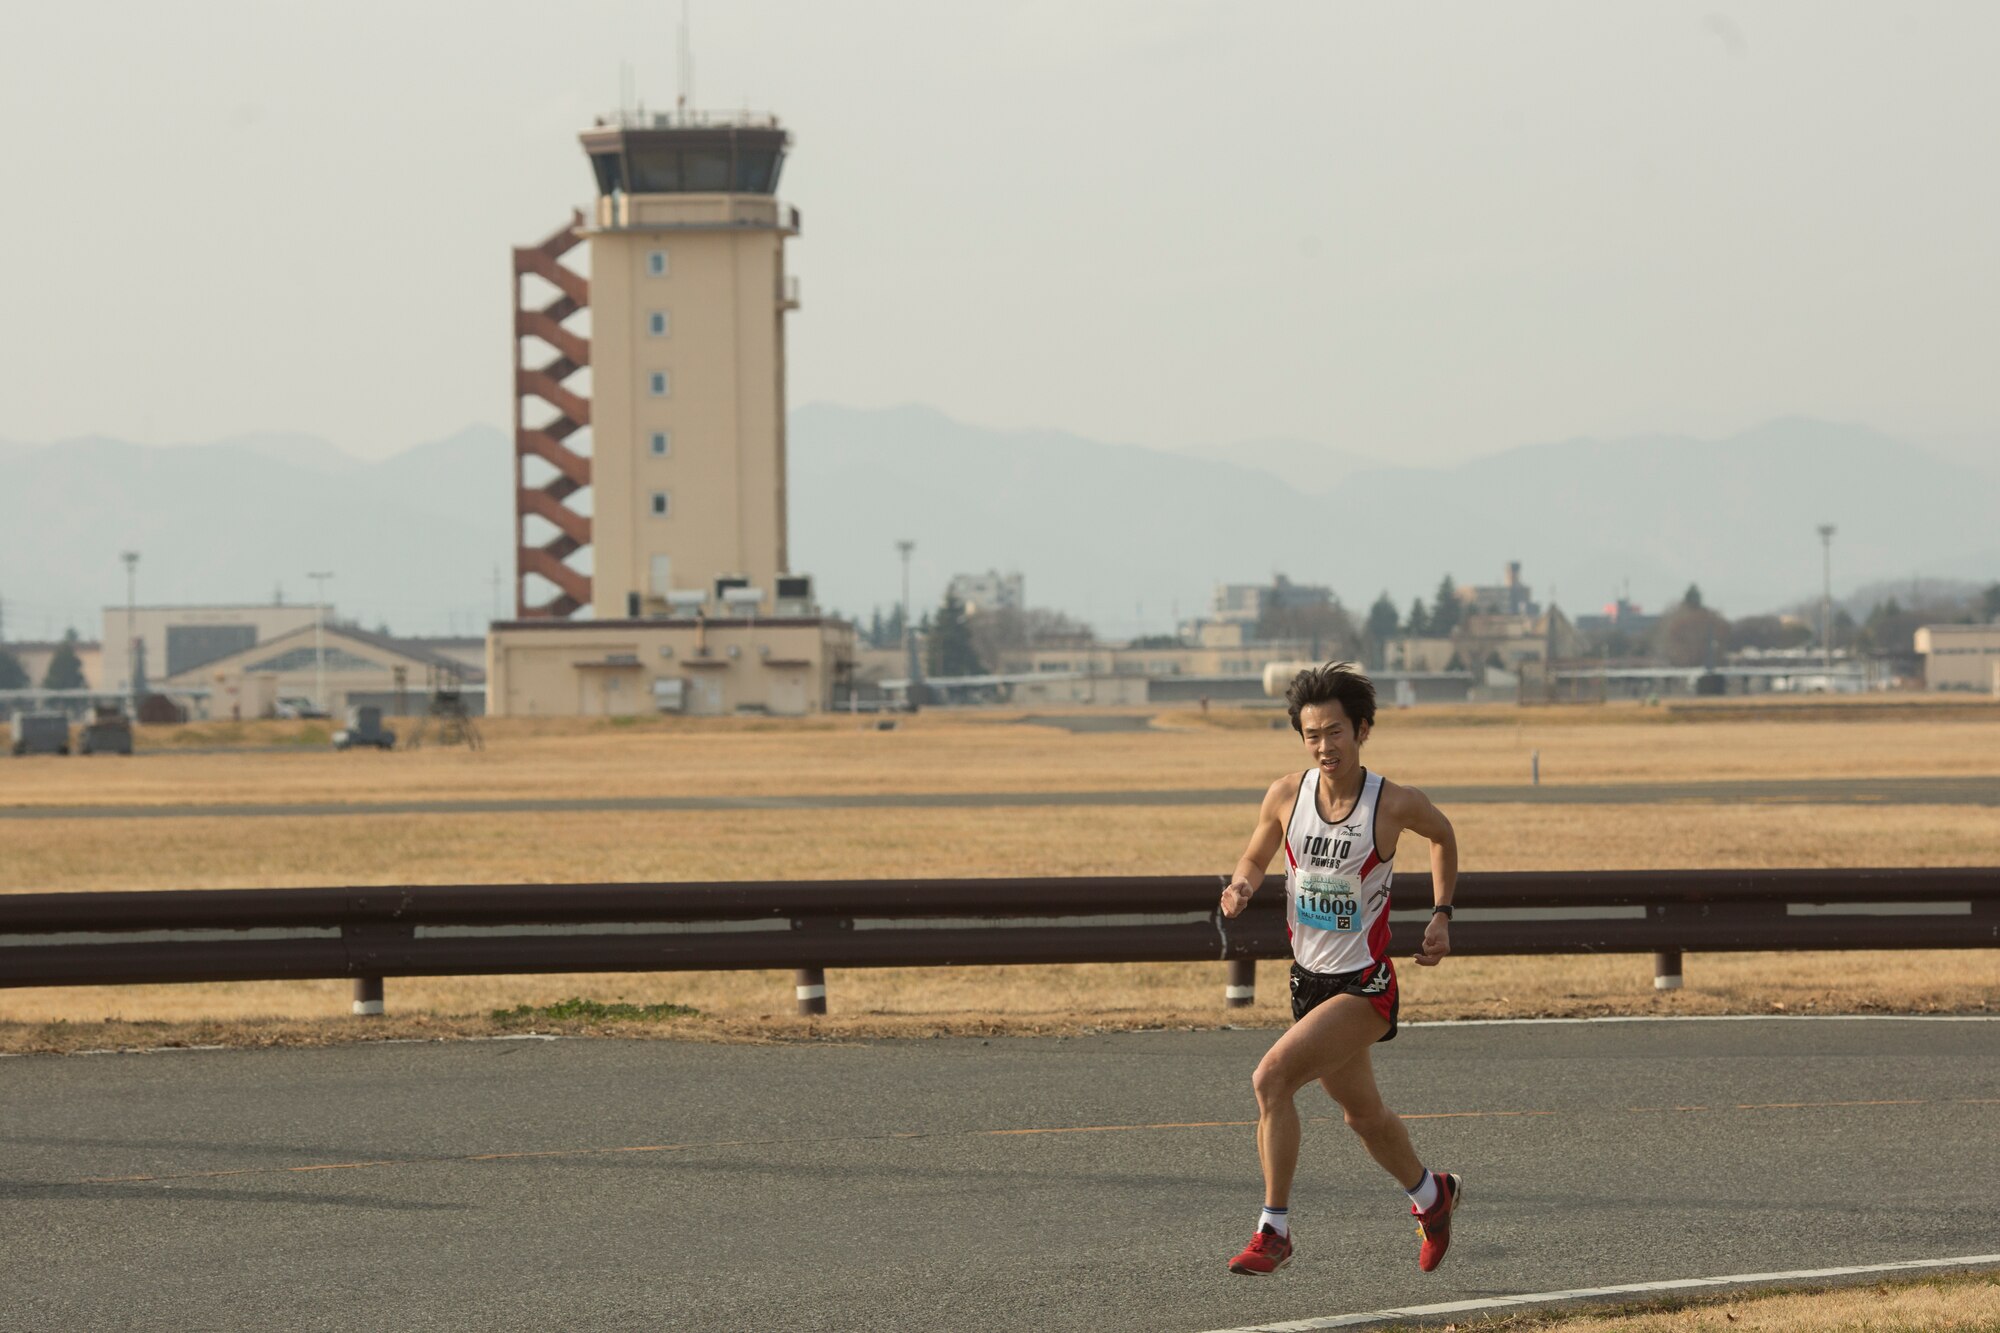 Akio Tsukamoto runs in the half marathon during the 35th Annual Frostbite Run at Yokota Air Base, Japan, Jan. 17, 2016. Tsukamoto won first place by 1:11:05. Team Yokota hosted over 9,000 participants for the race. (U.S. Air Force photo by Osakabe Yasuo/Released)